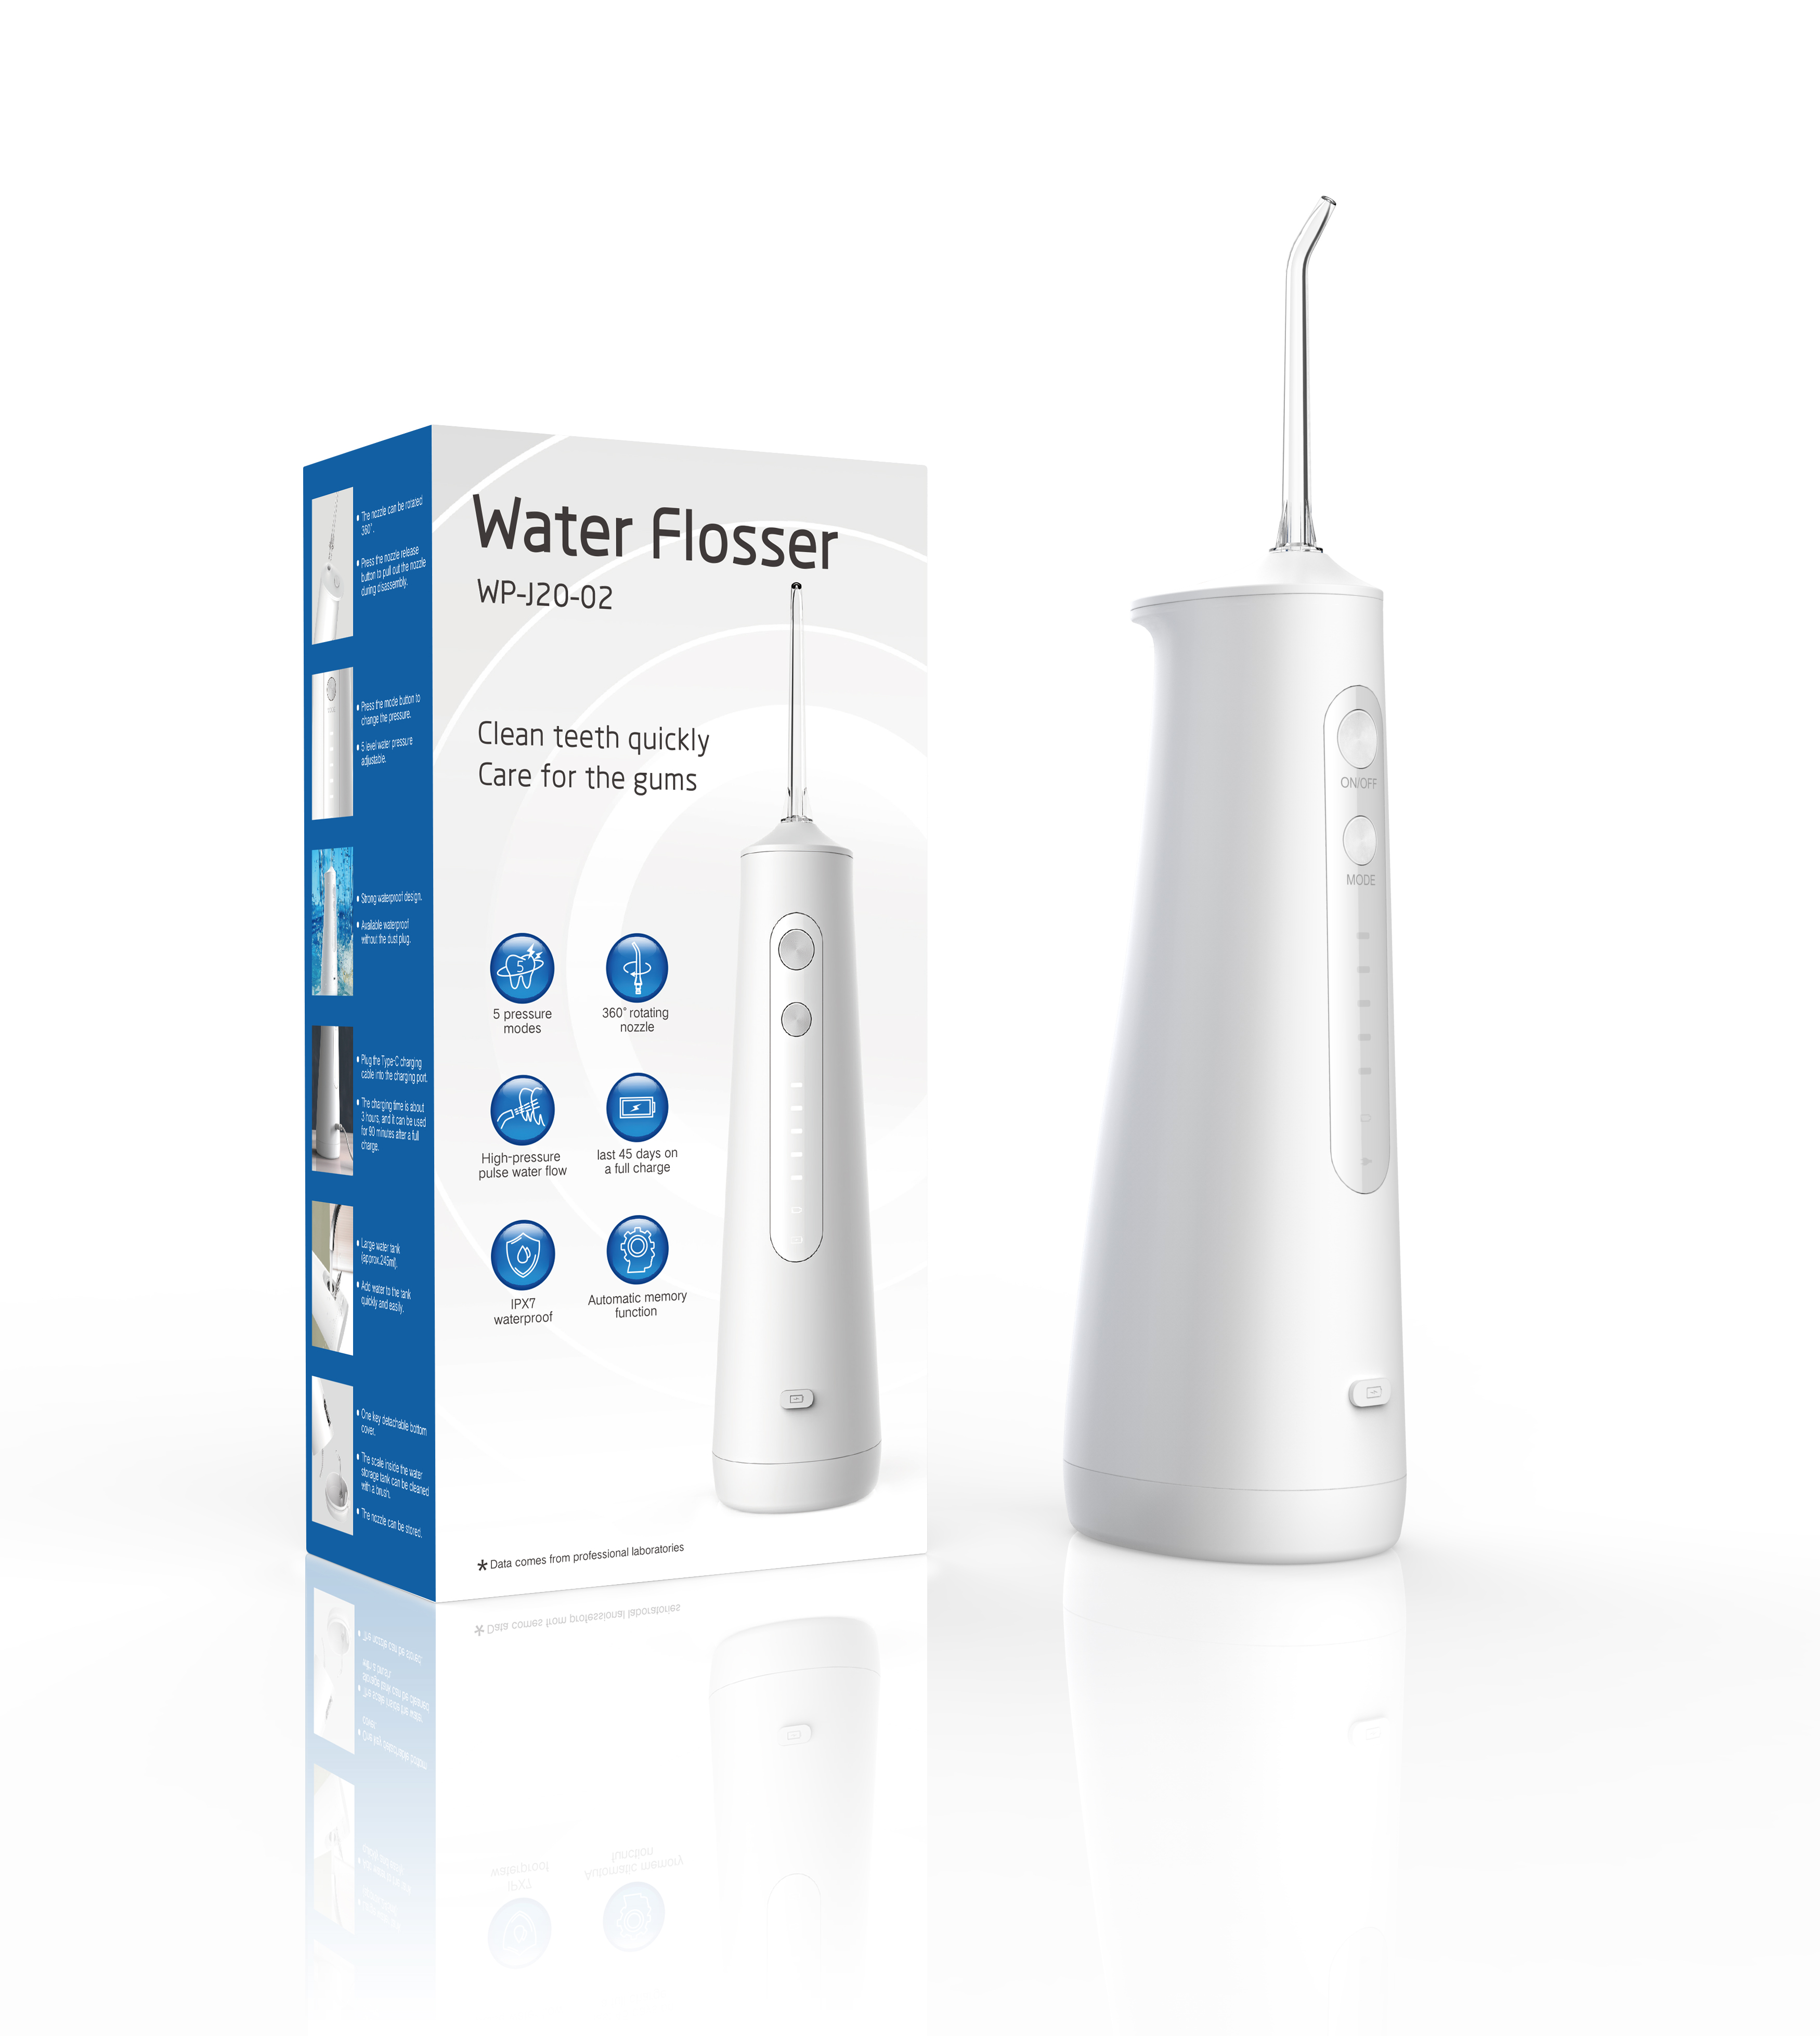 Does water floss prevent bad breath?